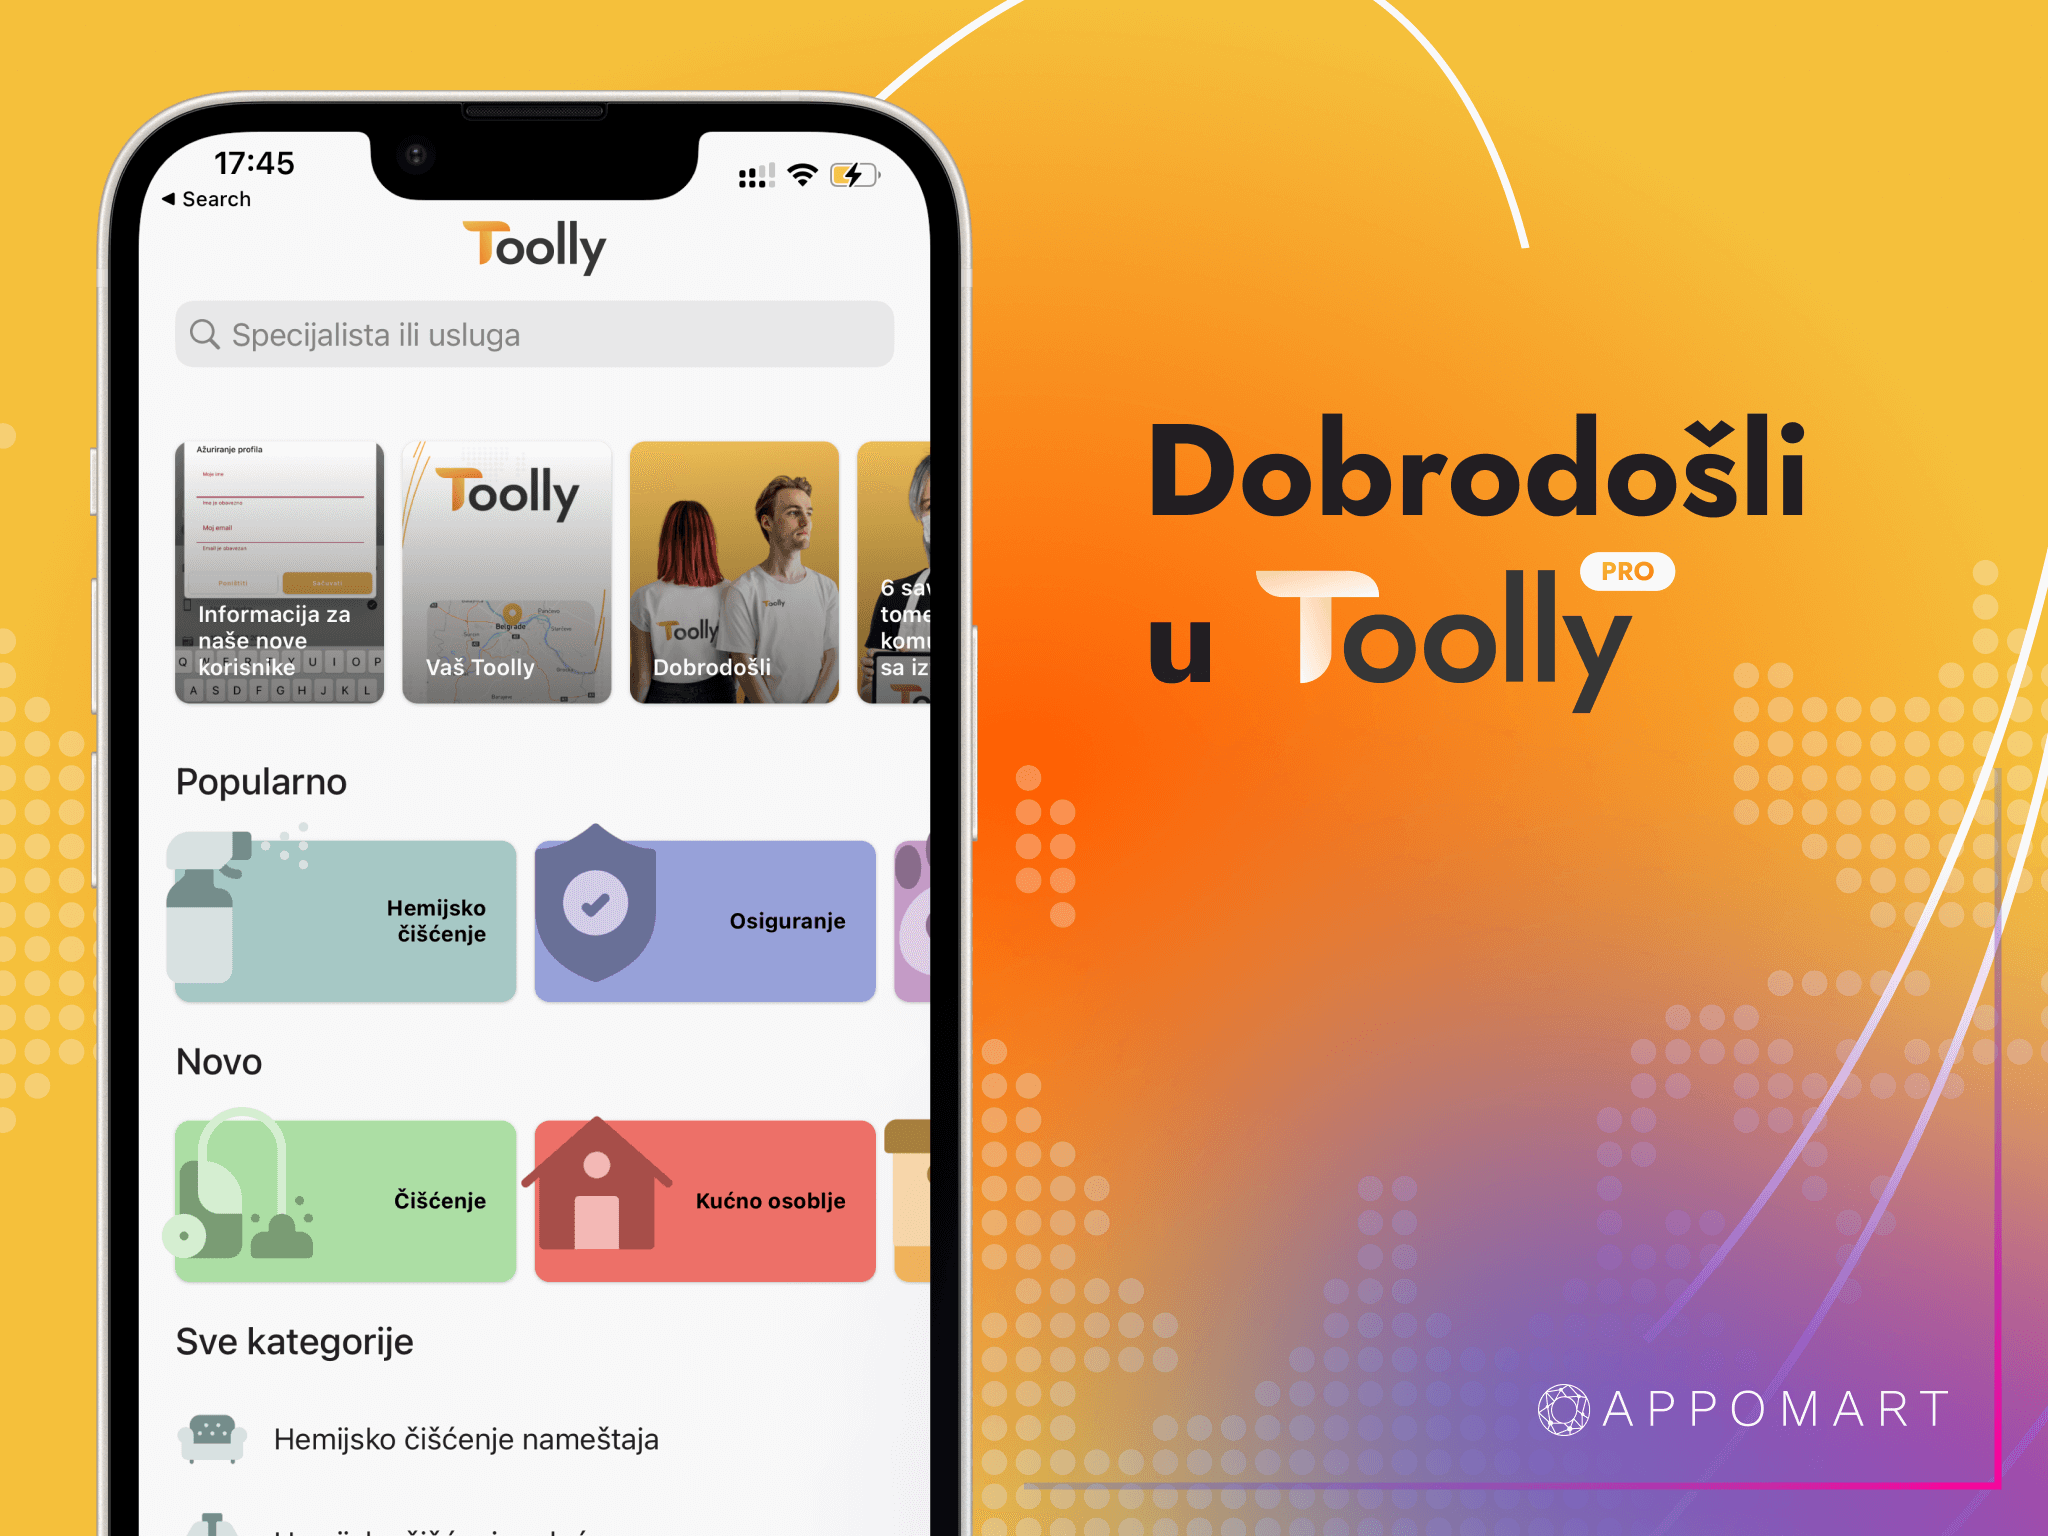 Our company, Appomart, proudly presents Toolly - an innovative application developed specifically for the Serbian market of IT services